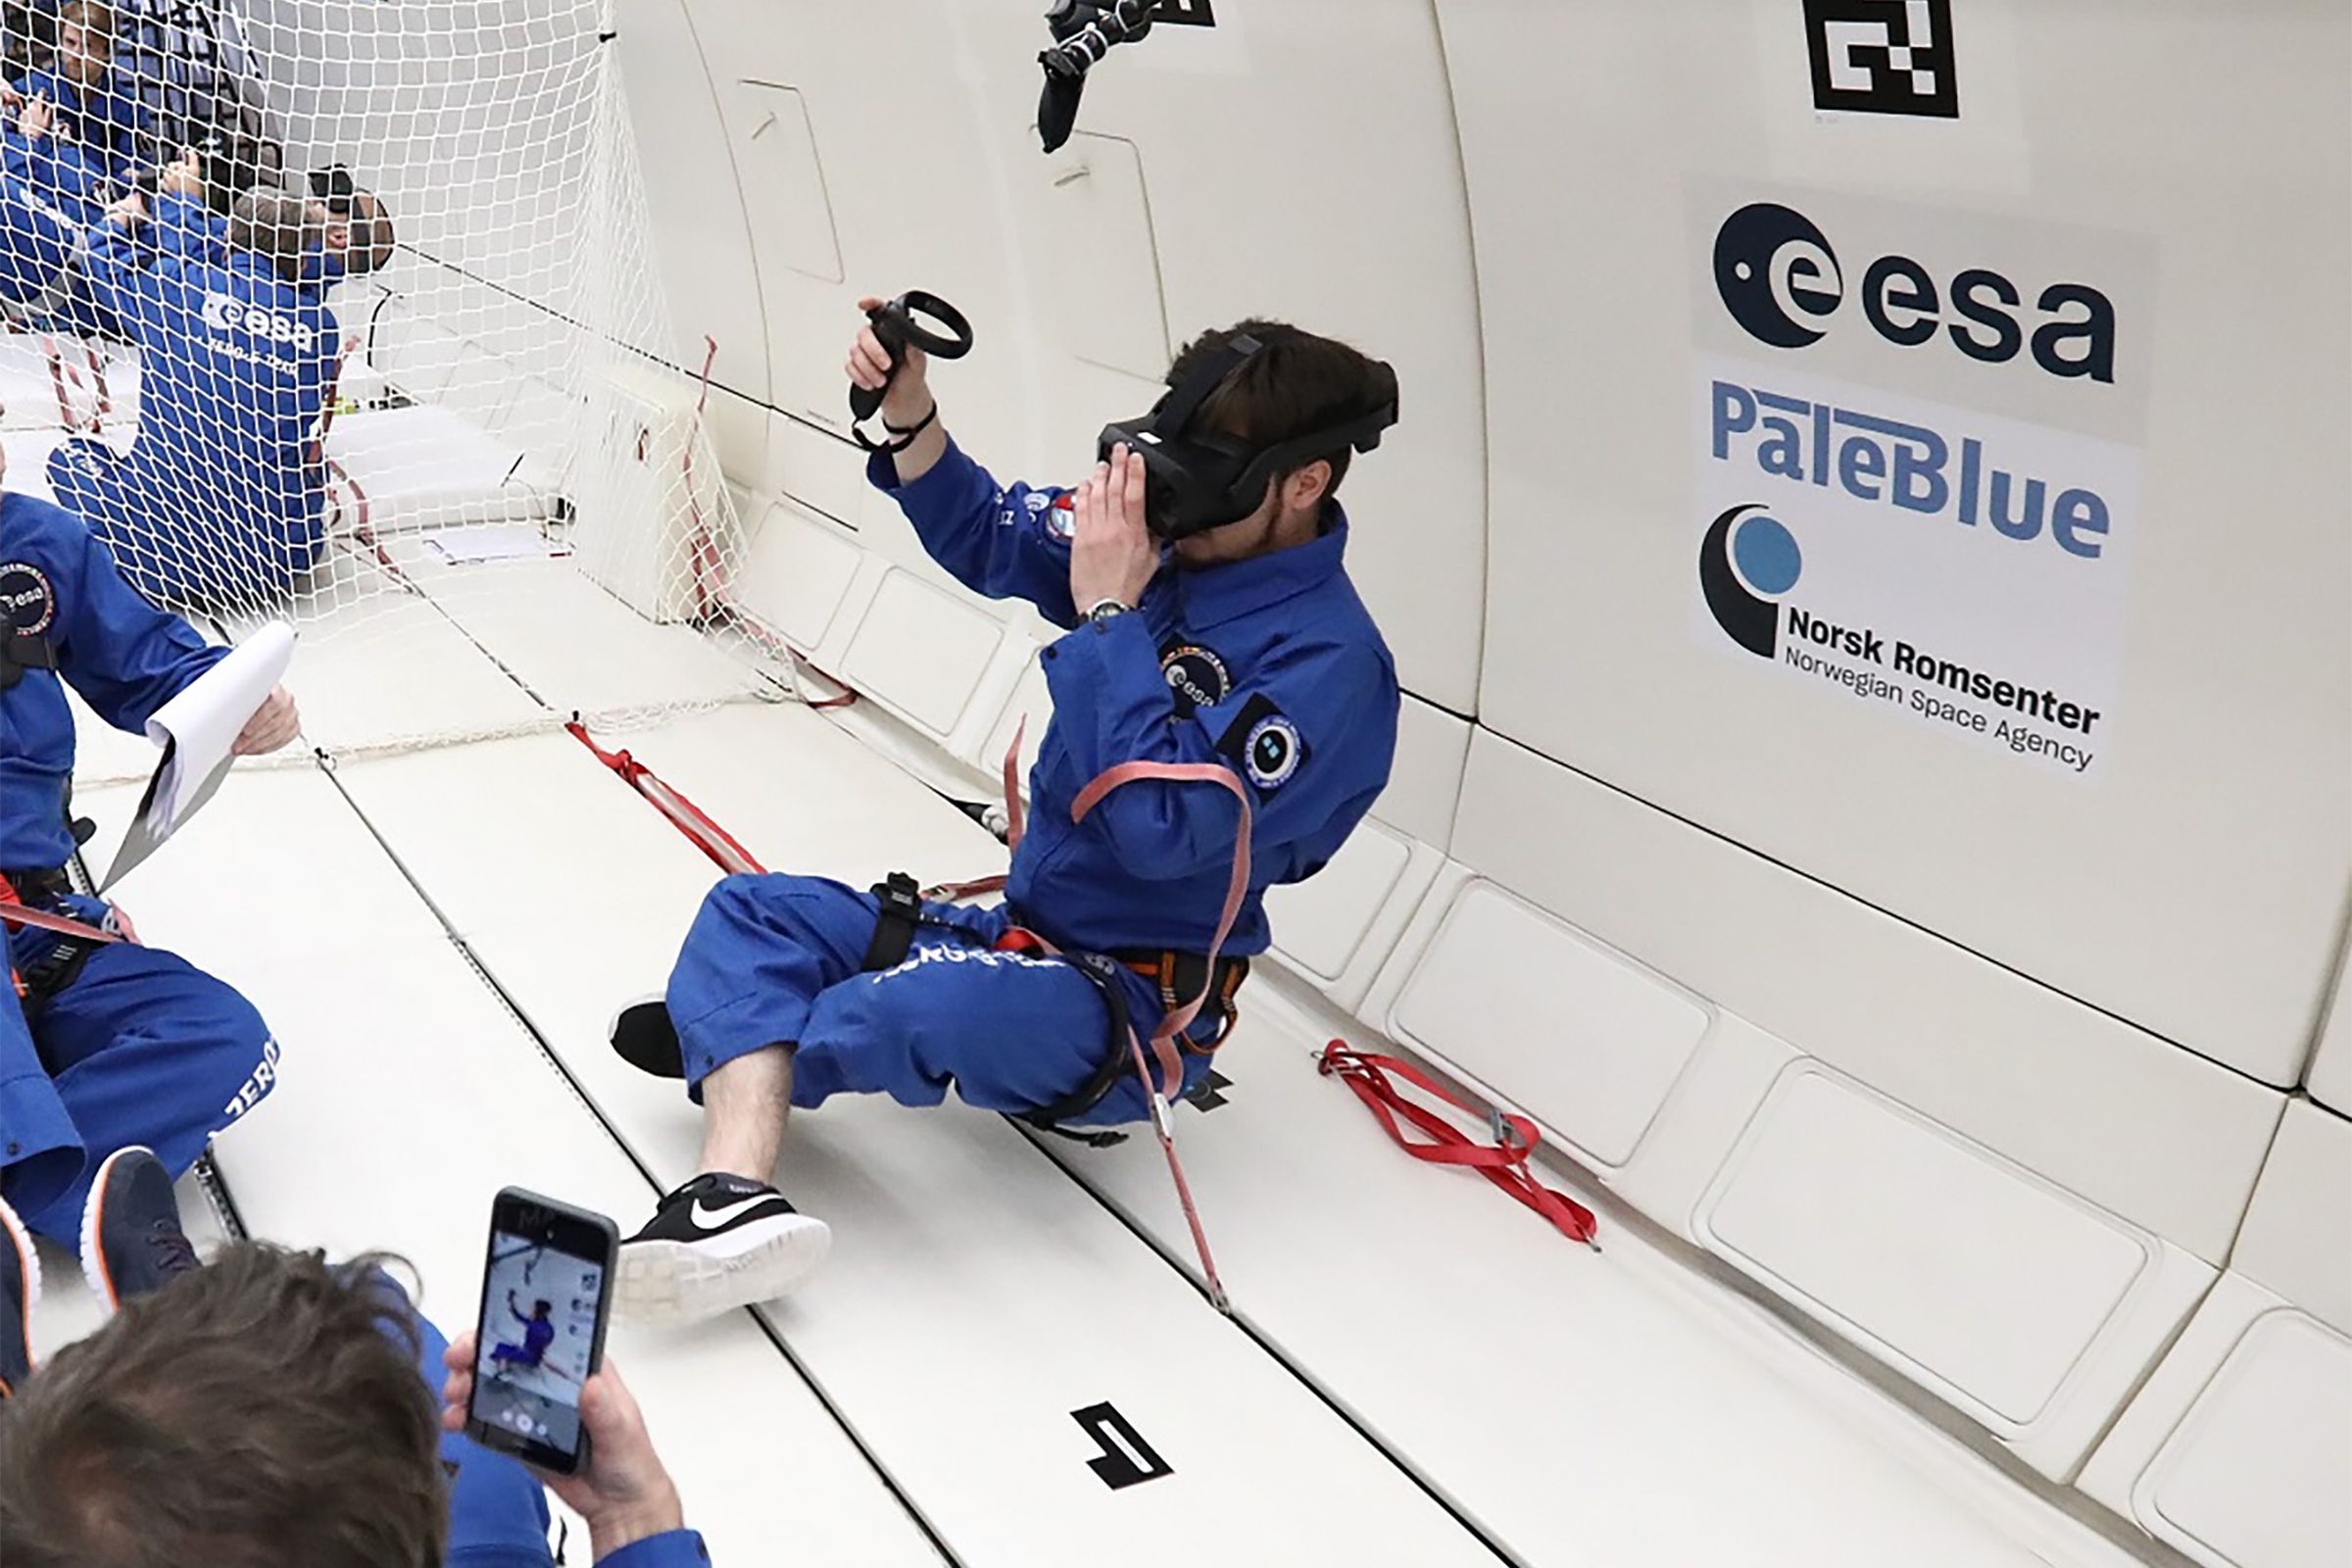 A person “sits” cross-legged while floating above the floor of a plane during a parabolic flight.